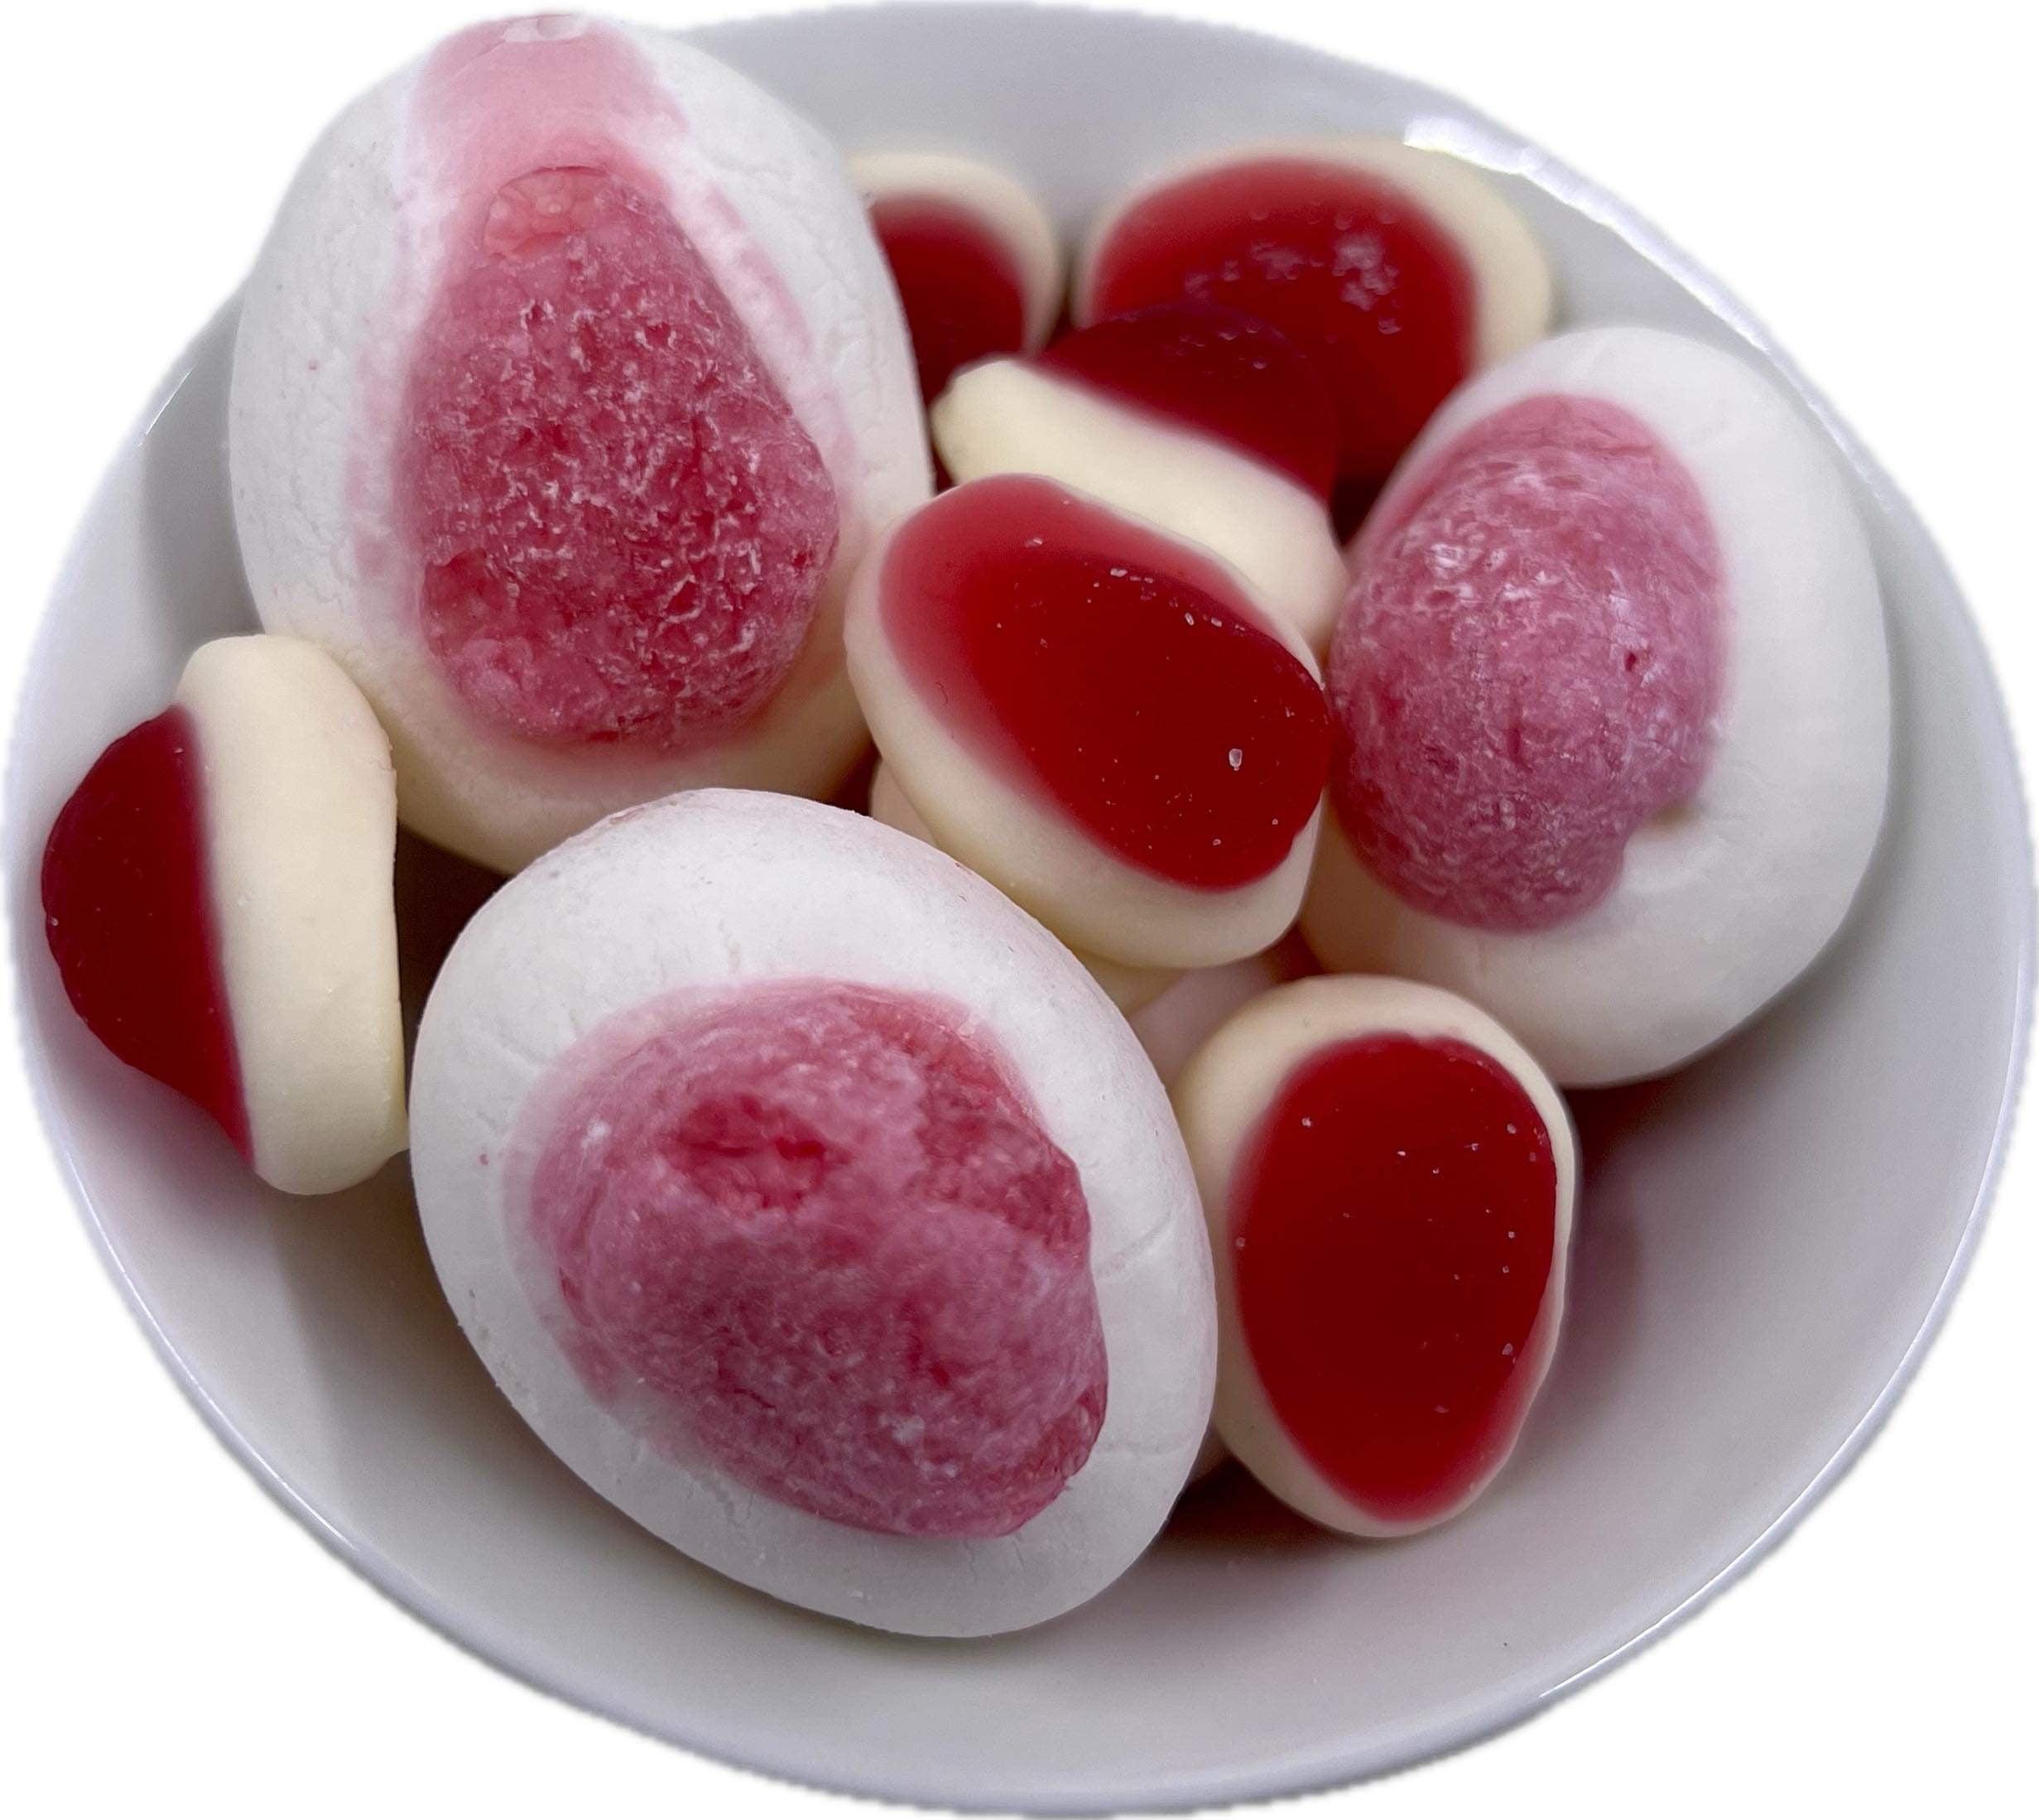 Freeze Dried Strawberries and Cream